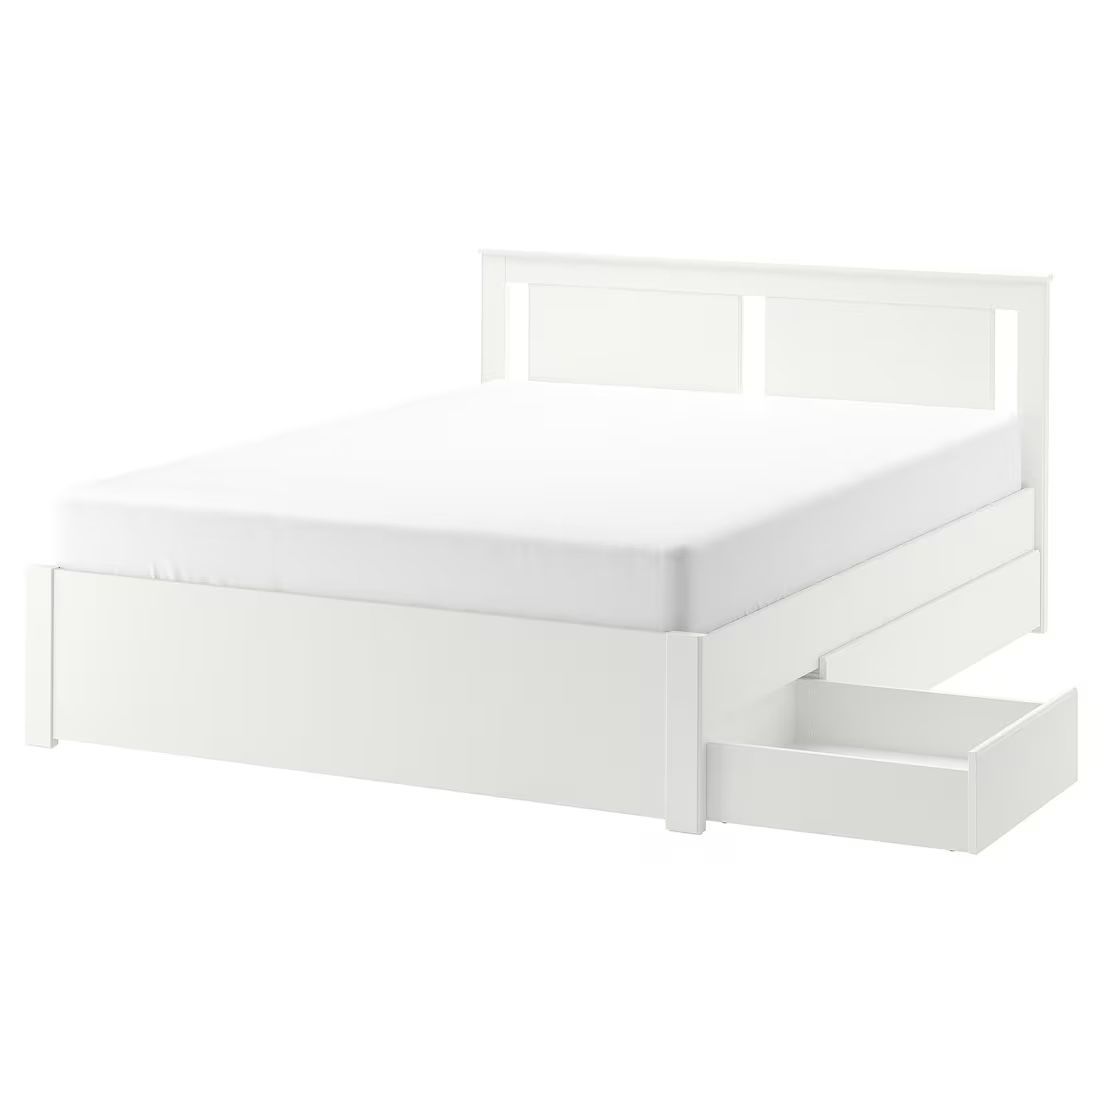 IKEA SONGESAND Queen Size Bed With Storage  (Retail Price $500)